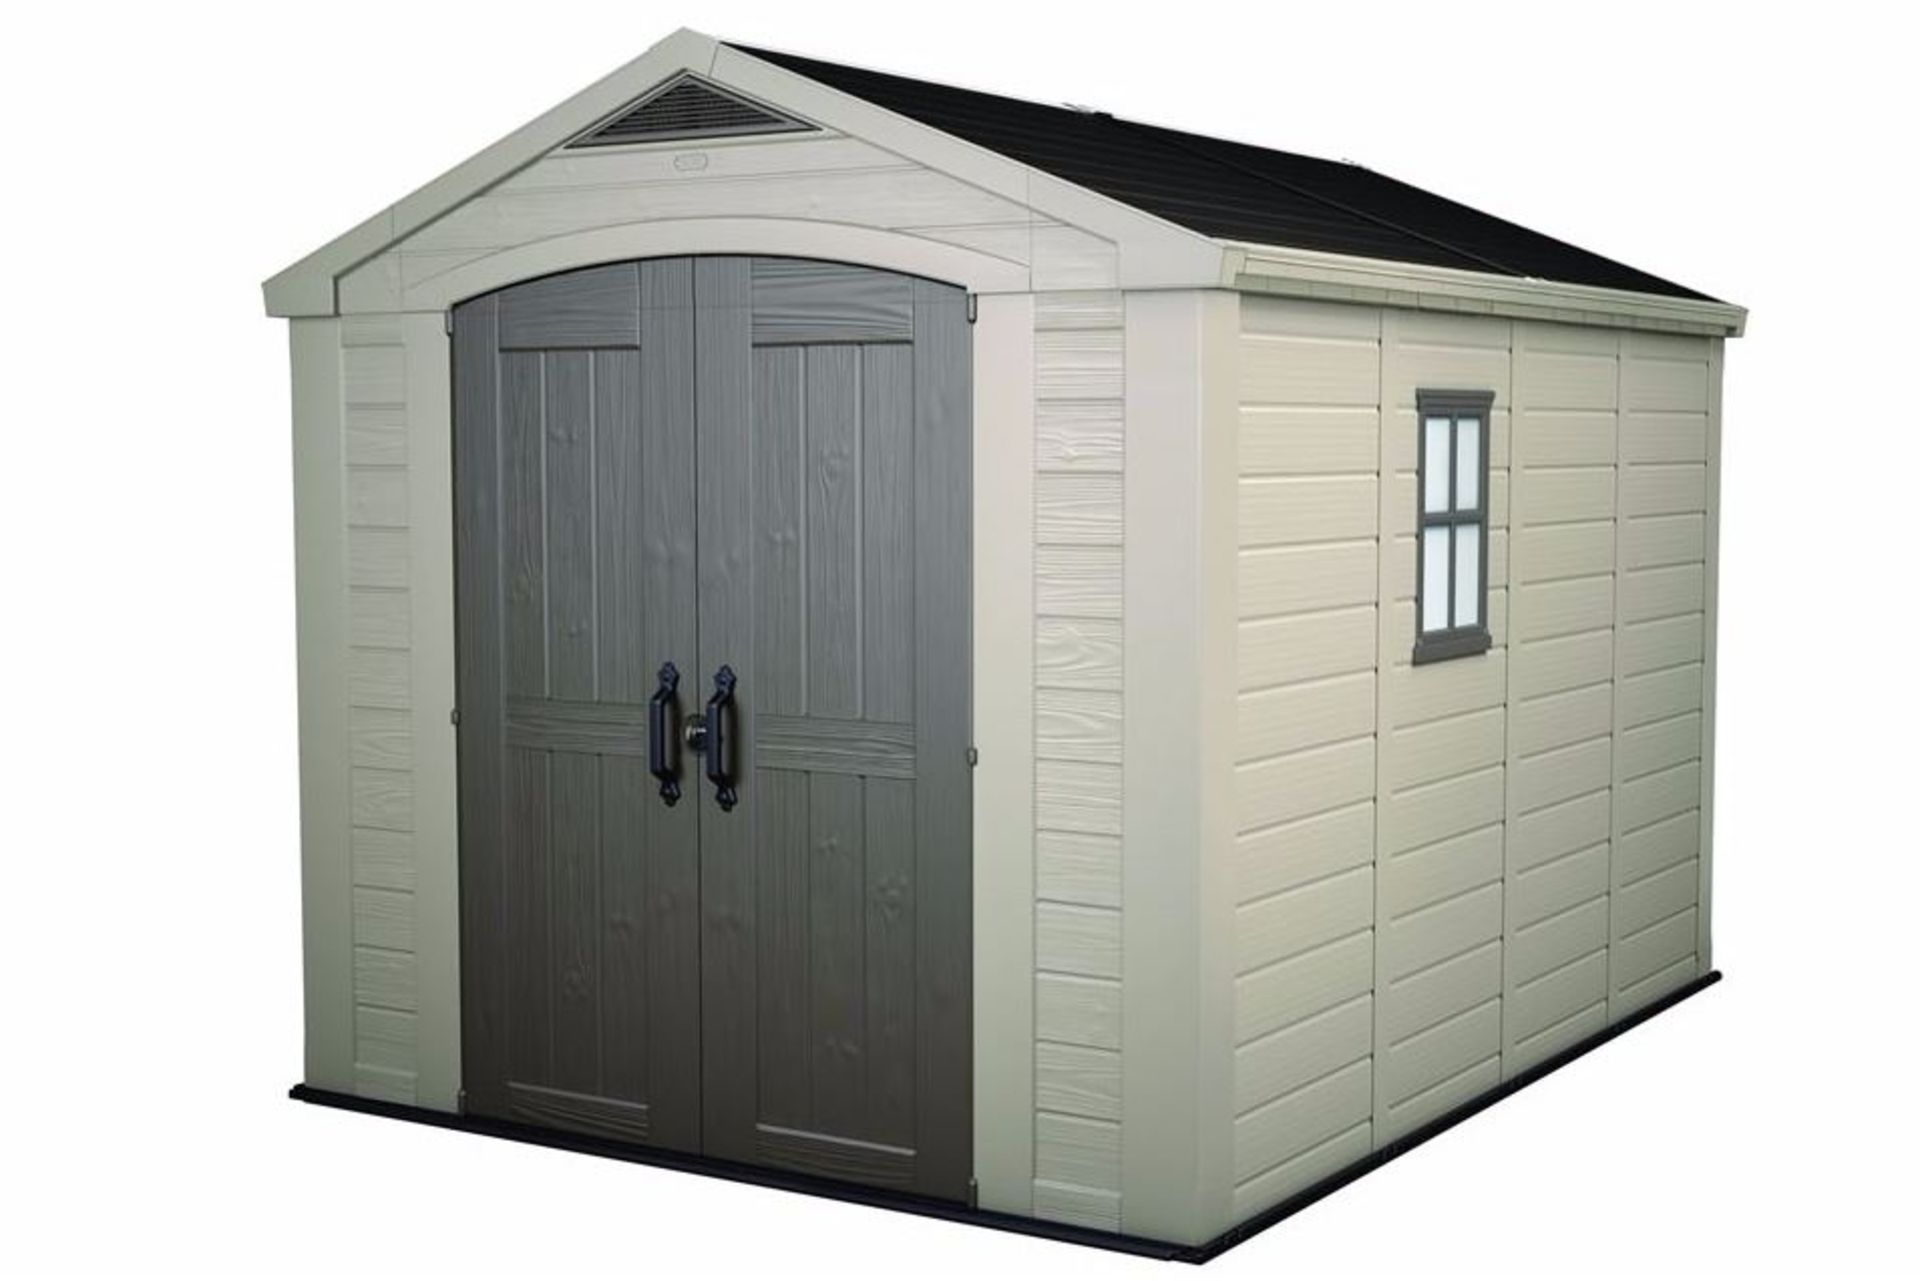 Keter Factor 8 x 11 Shed RRP £899 The extremely spacious Factor 8x11 - Image 3 of 5